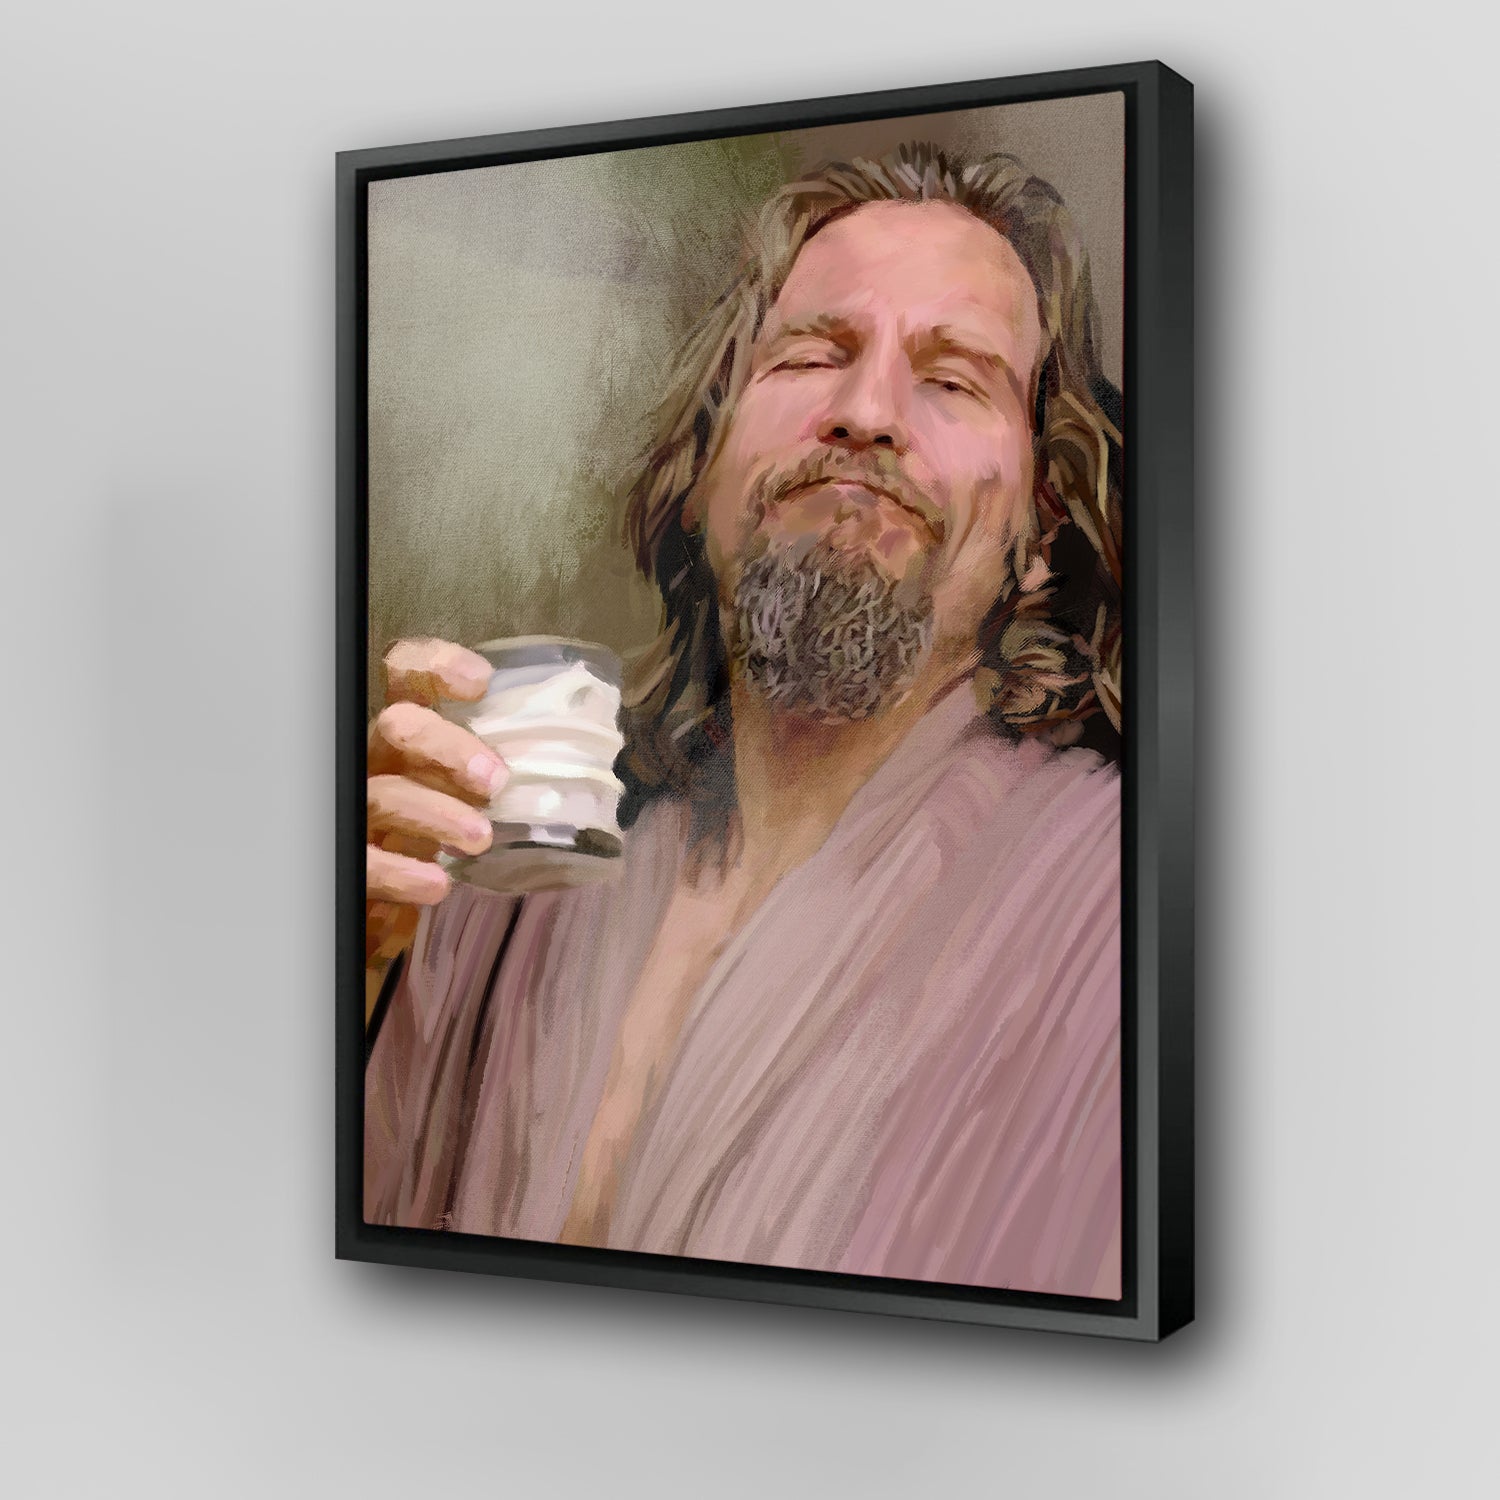 The Dude Says Cheers